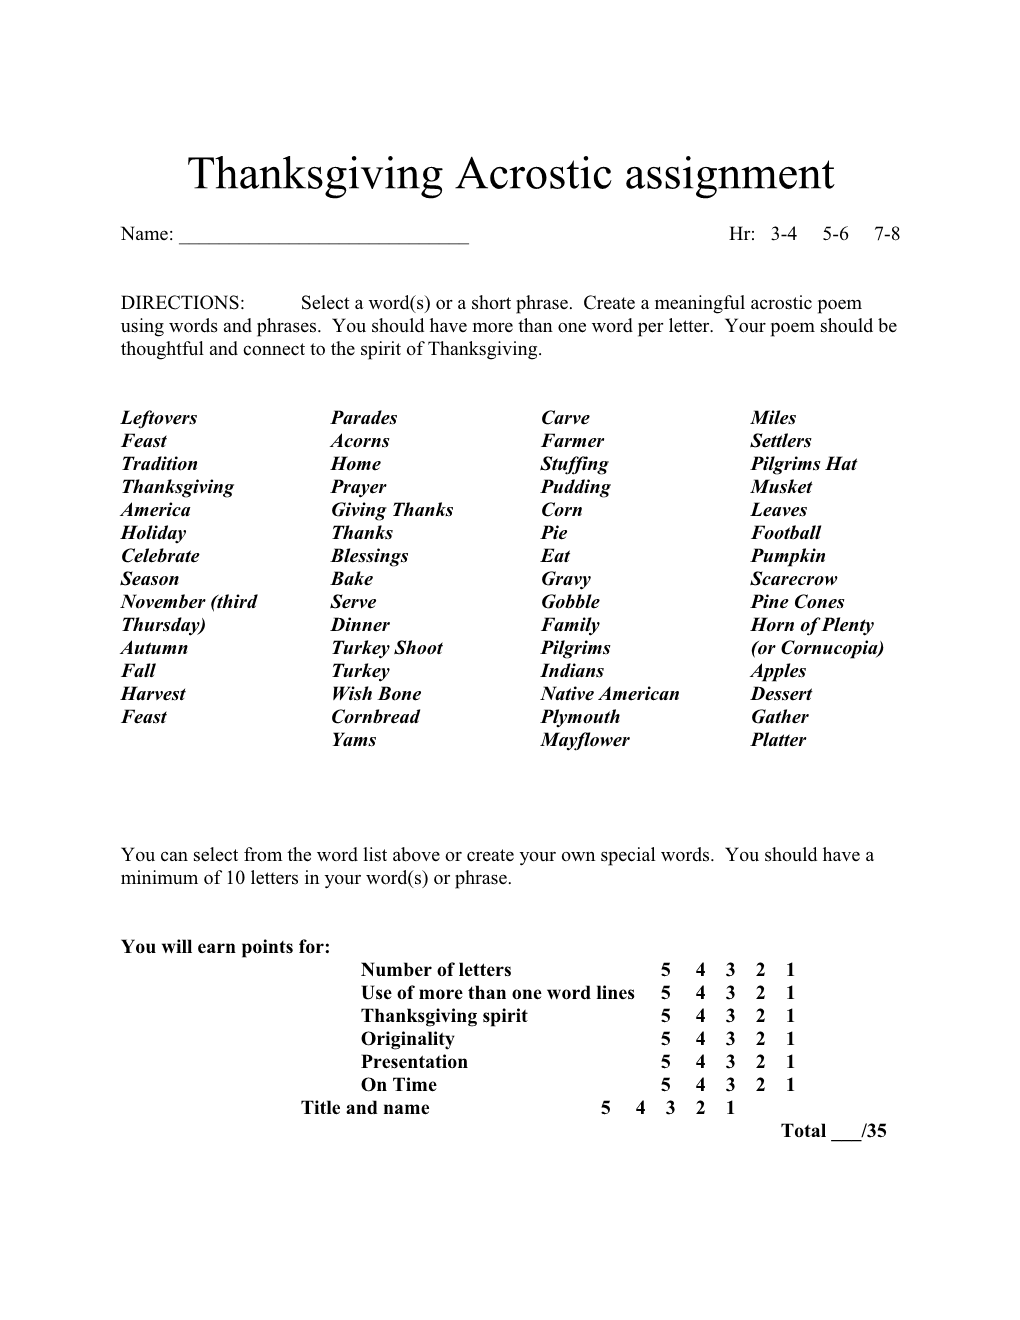 Thanksgiving Acrostic Assignment